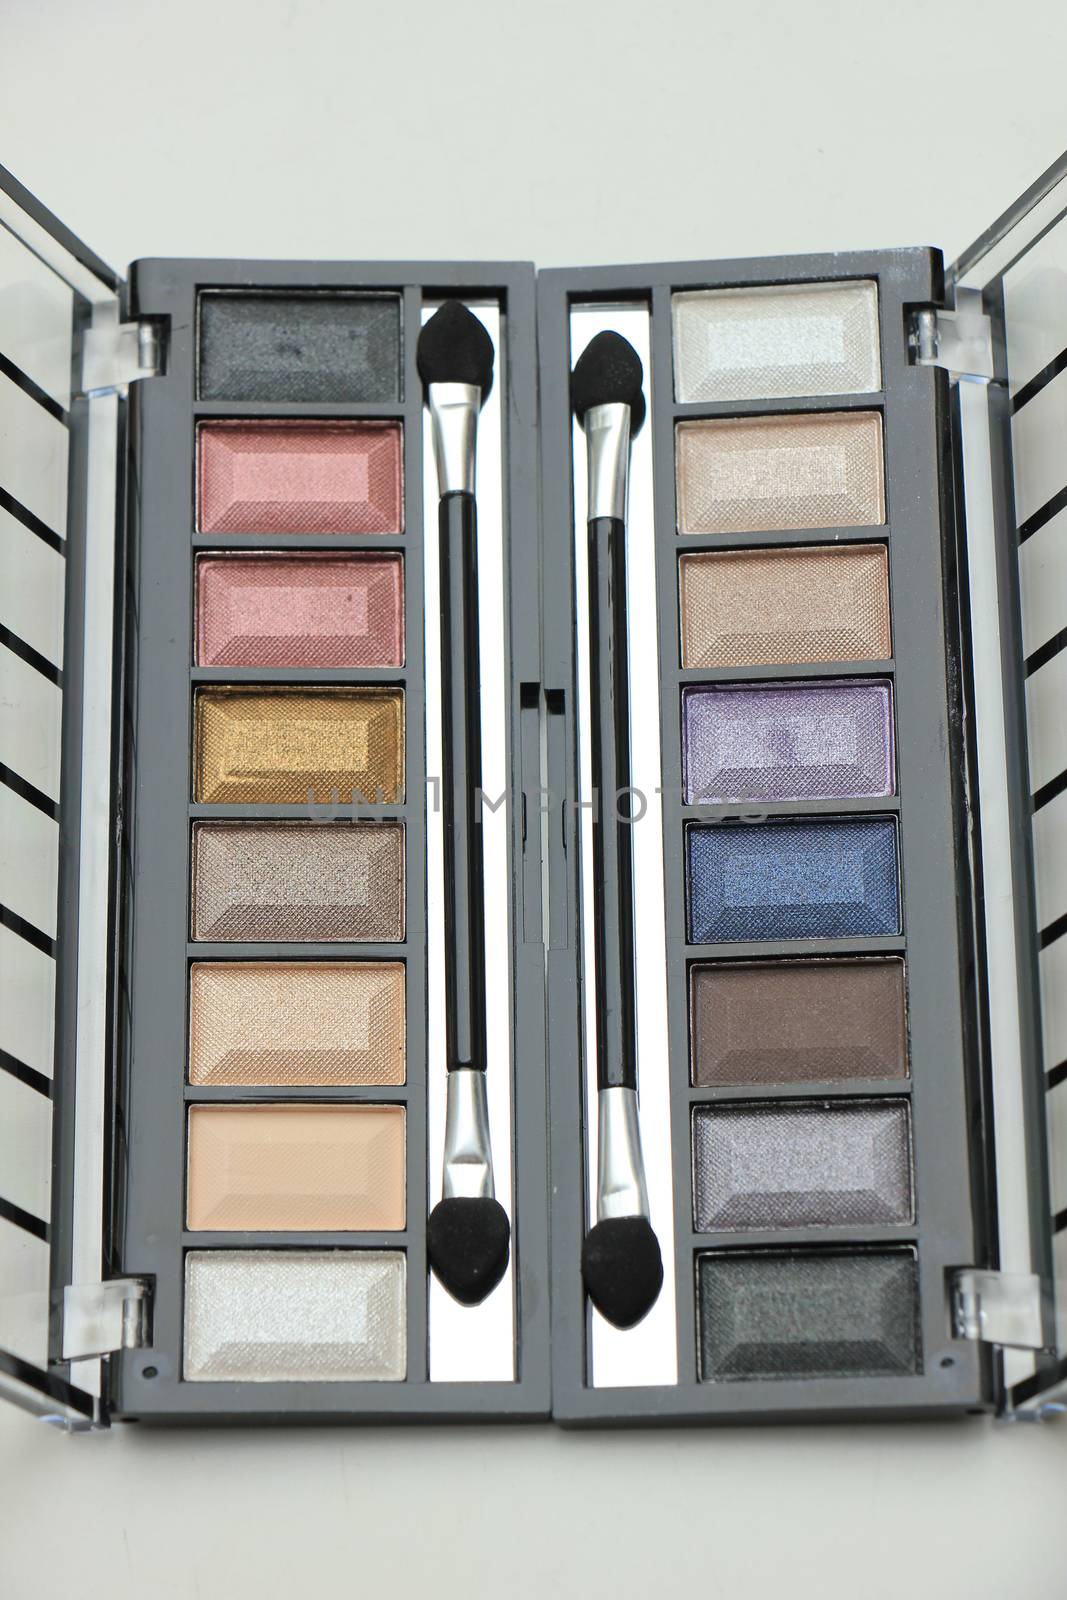 Eye shadow palette with various matching colors